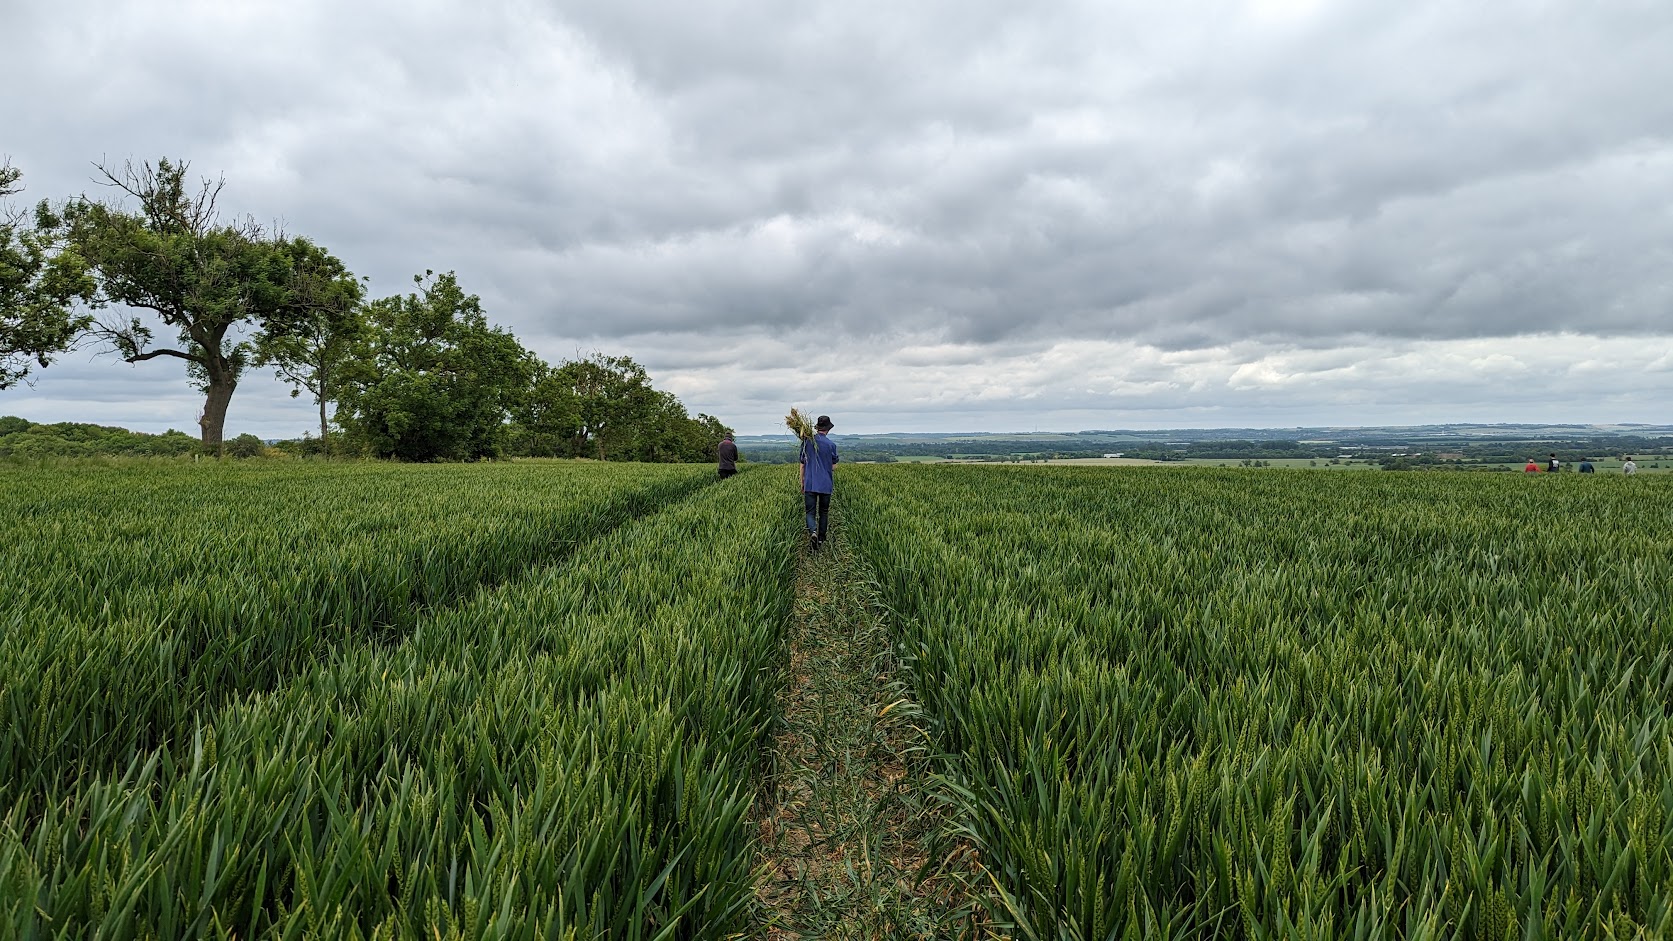 This summer I went to Cambridge to live and work on a massive field, weeding black grass from massive rows of barley. Me and my friend Louie worked 11 hour shifts non-stop for 2 weeks to make good money for summer, was also very good exercise.